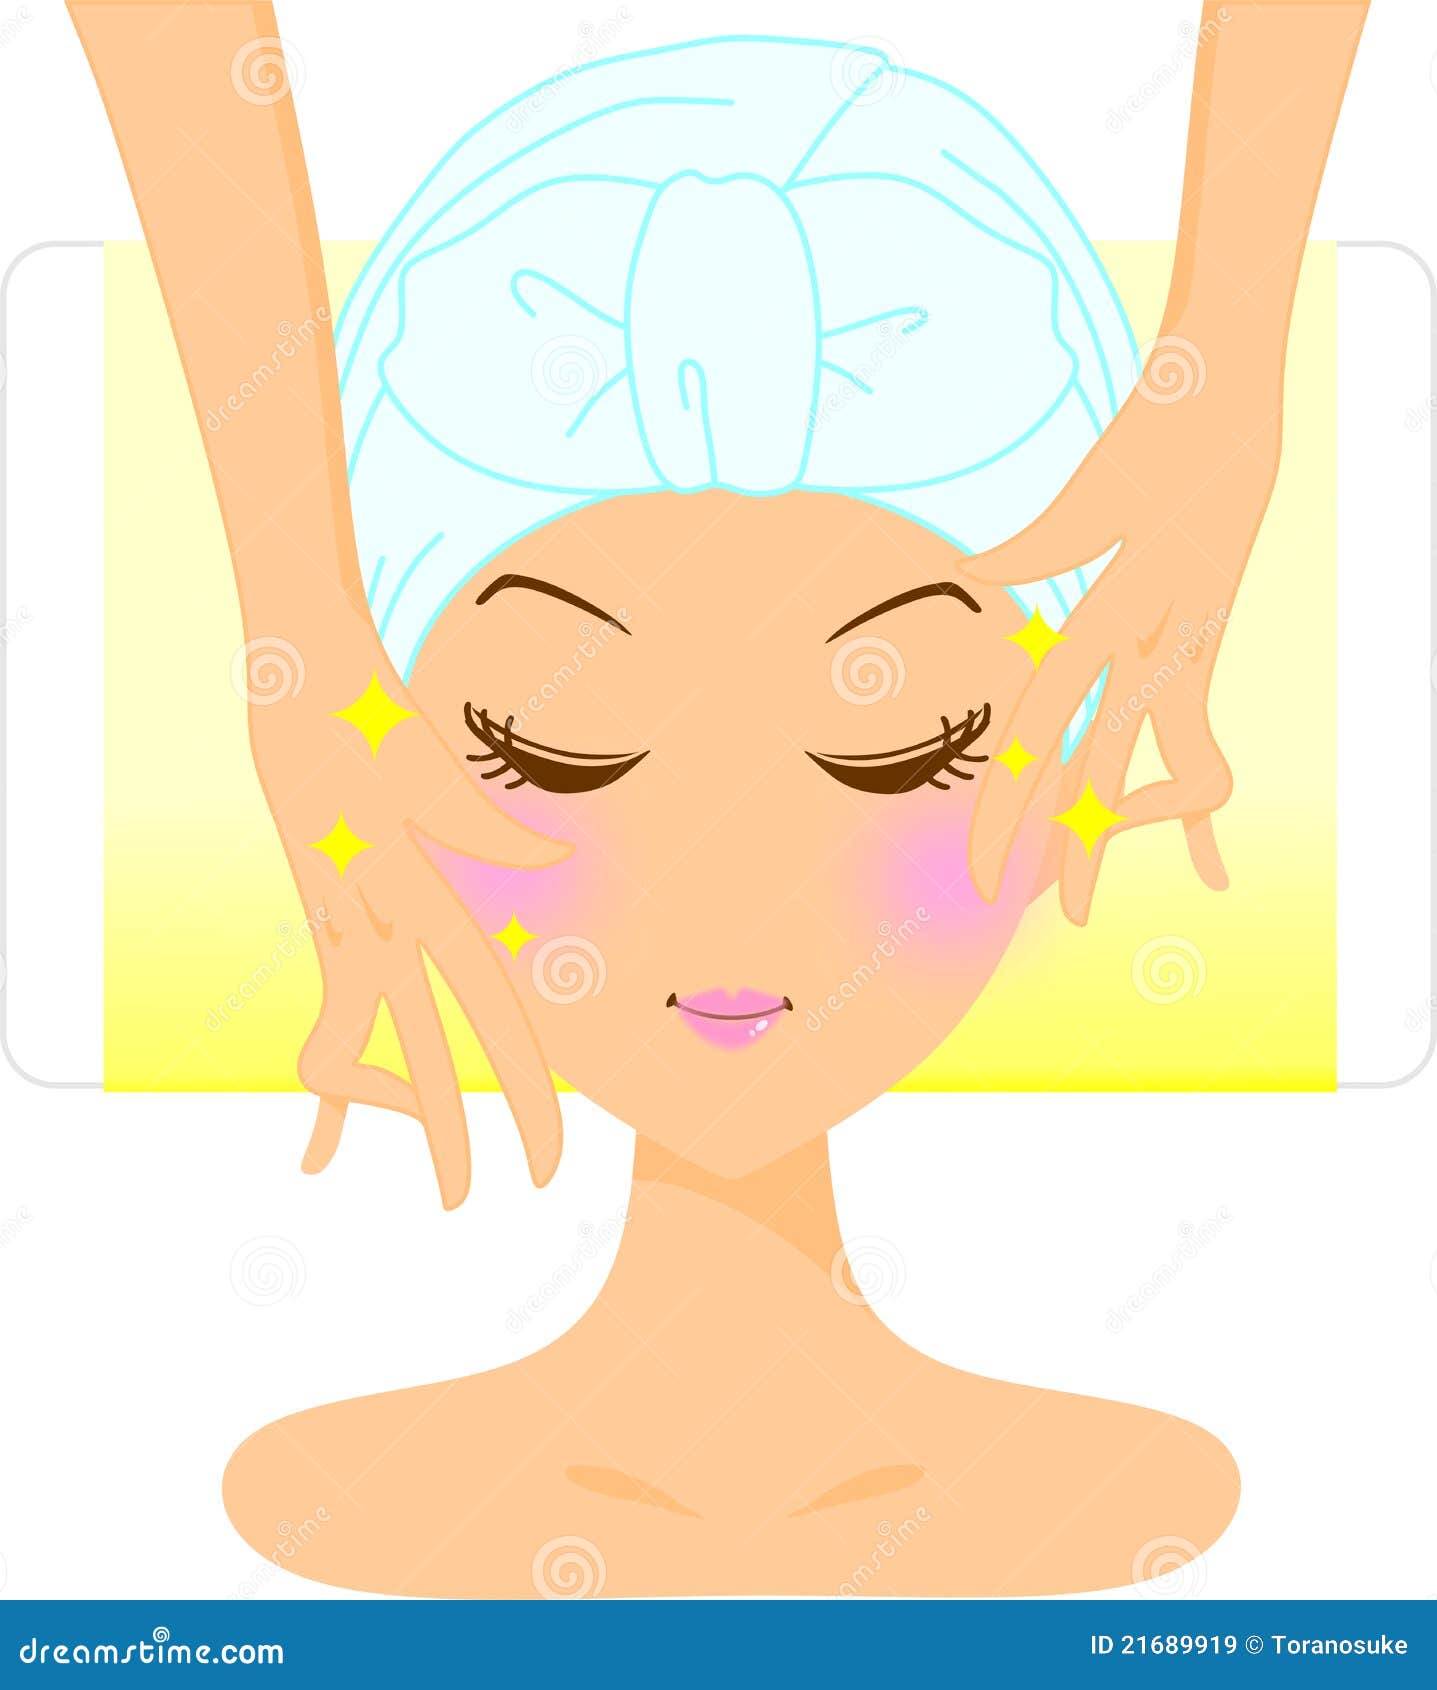 Esthetics Cartoons Illustrations And Vector Stock Images 101 Pictures To Download From